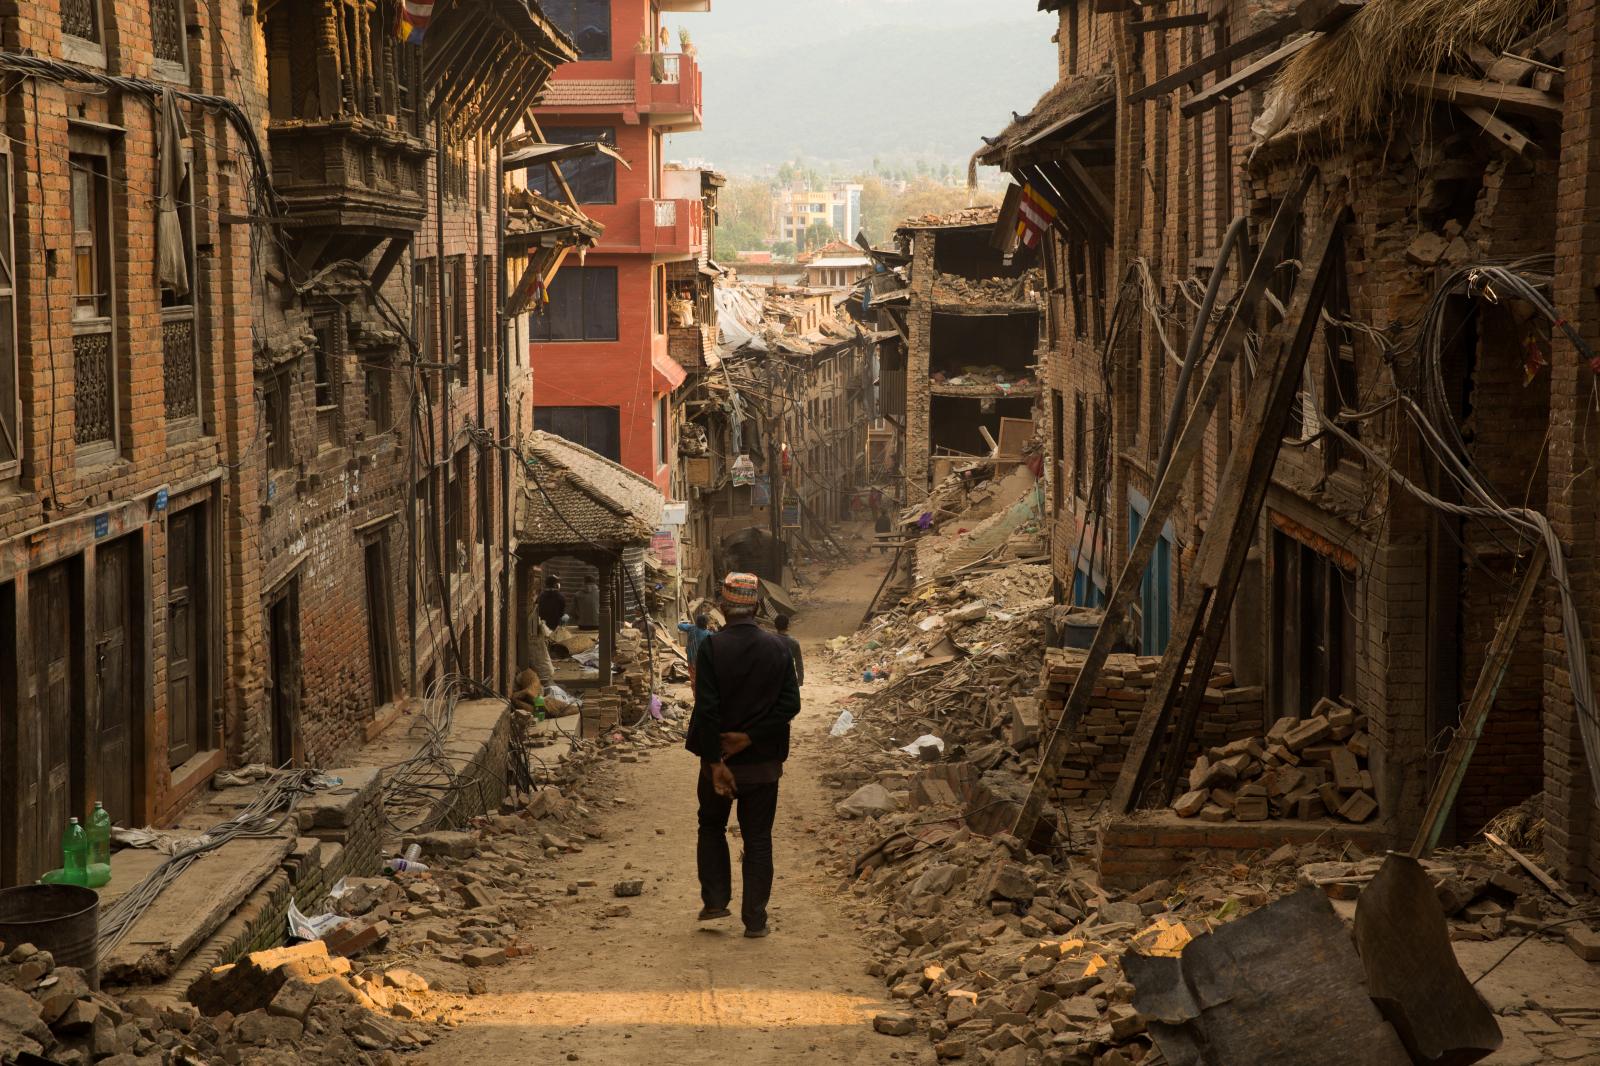 Nepal: A Shattered Country - 